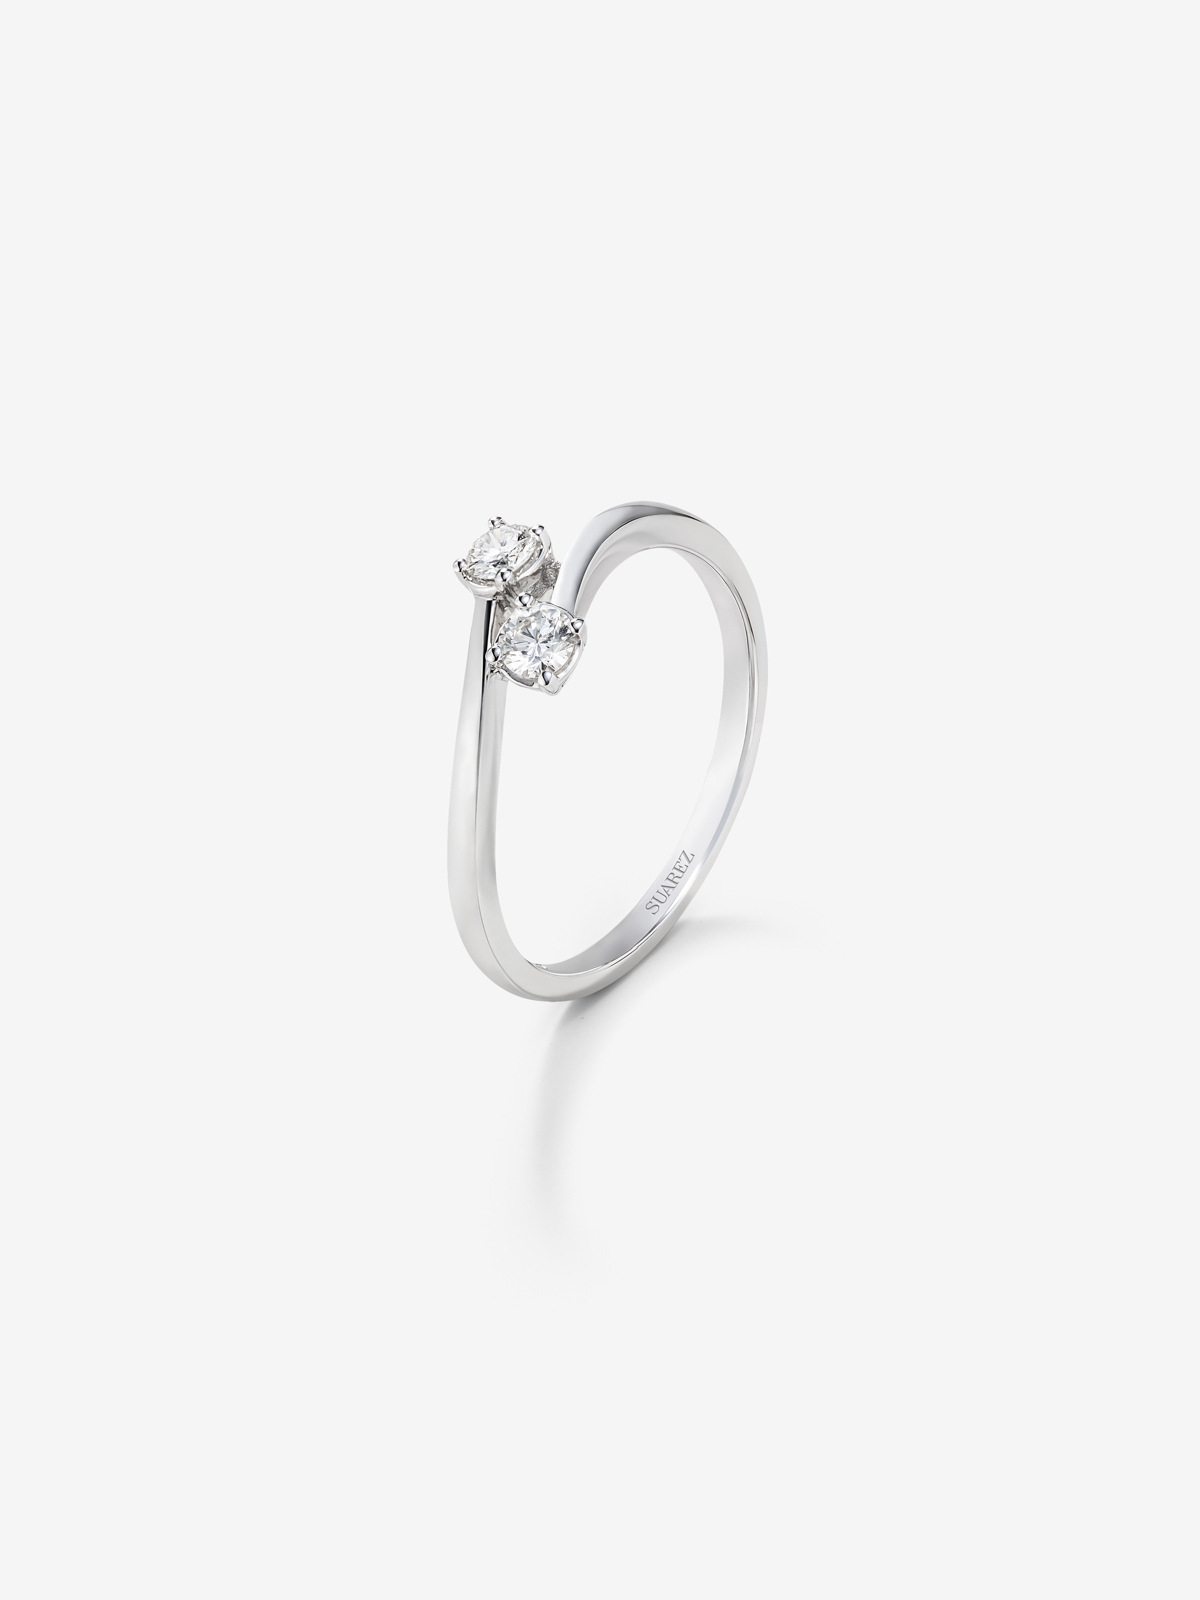 You and I 18k White Gold Ring with diamonds